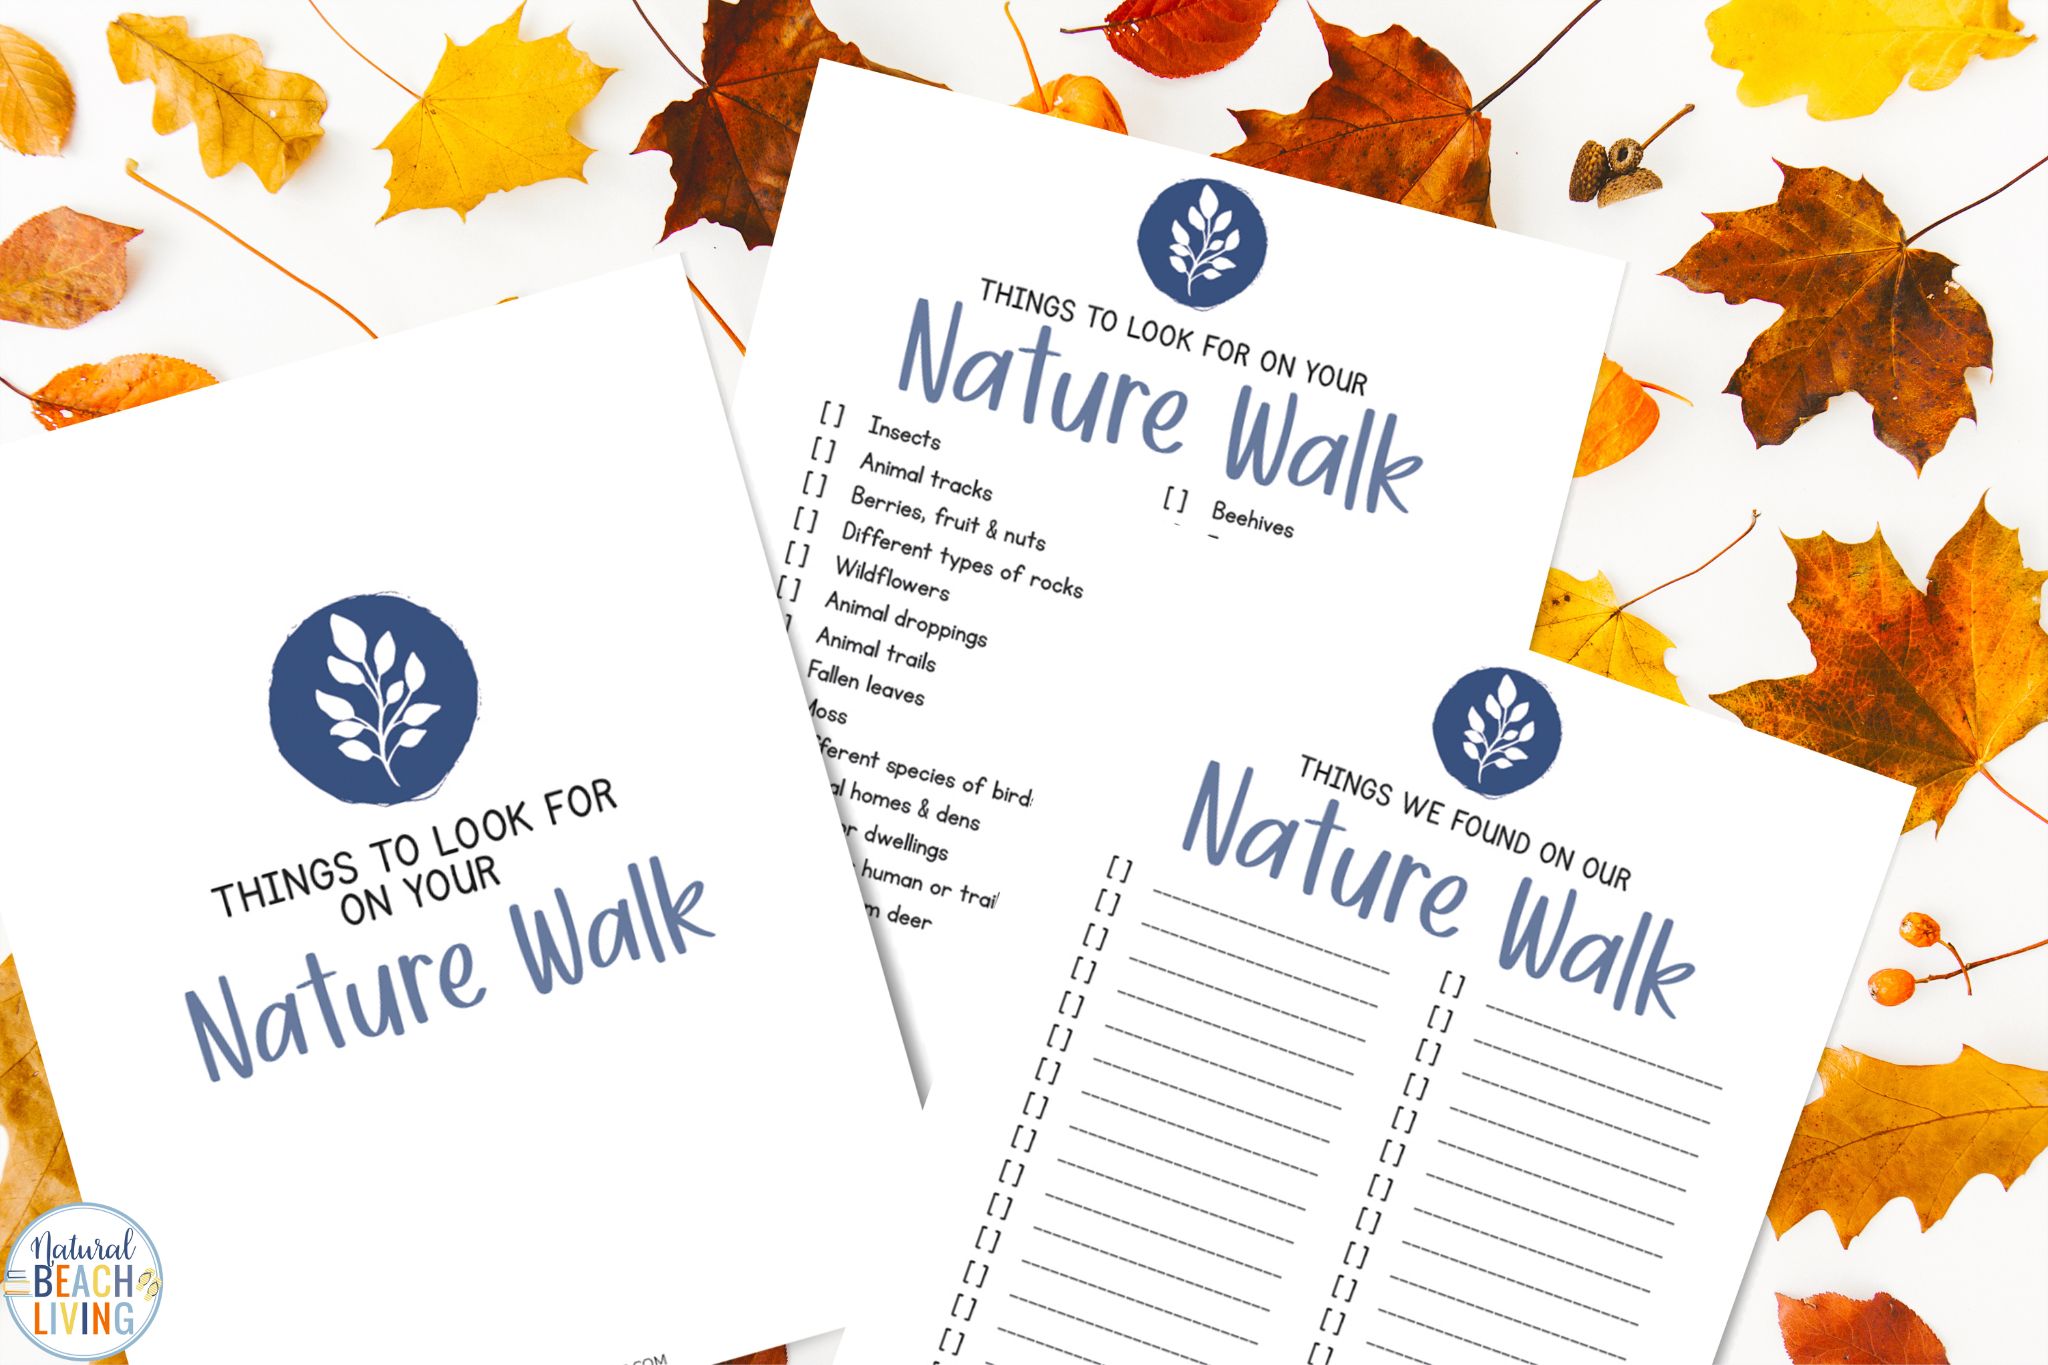 Don’t miss this free printable nature walk checklist and a scavenger hunt to encourage learning fun while exploring nature study with your kids this year.